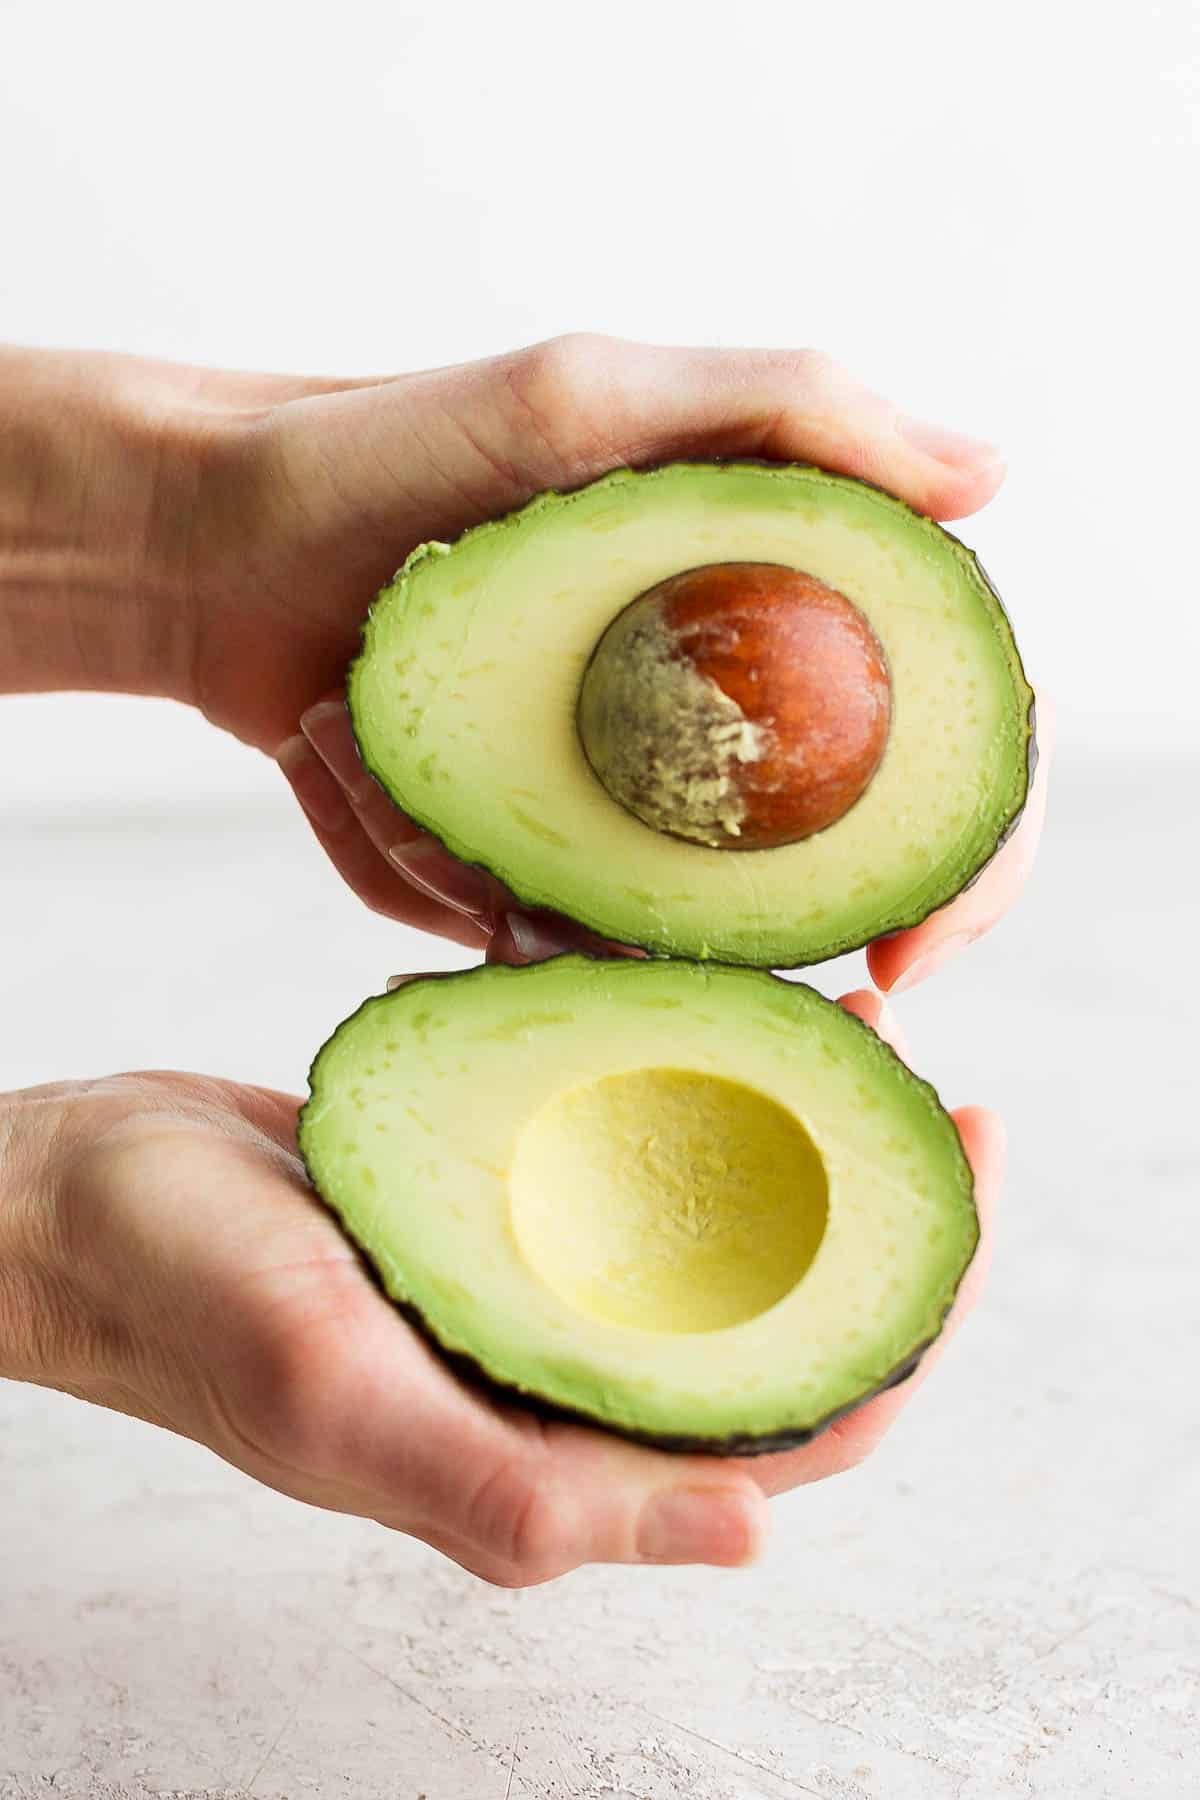 Hands holding both halves of an avocado.